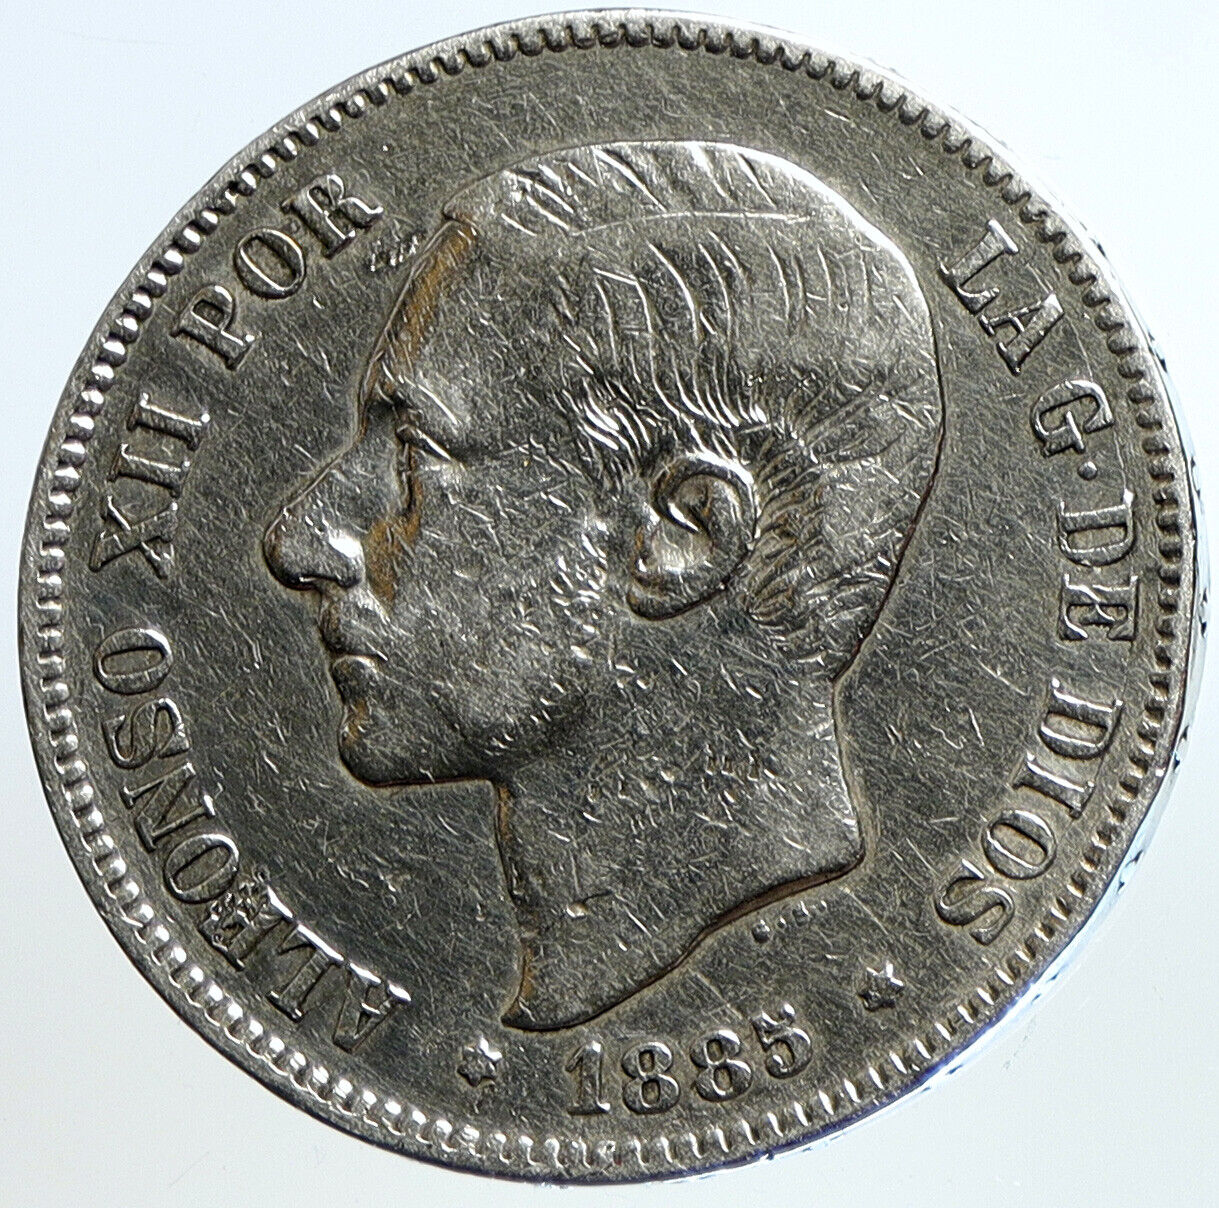 1885 SPAIN w King ALFONSO XII Antique OLD SPANISH Silver 5 Pesetas Coin i113439